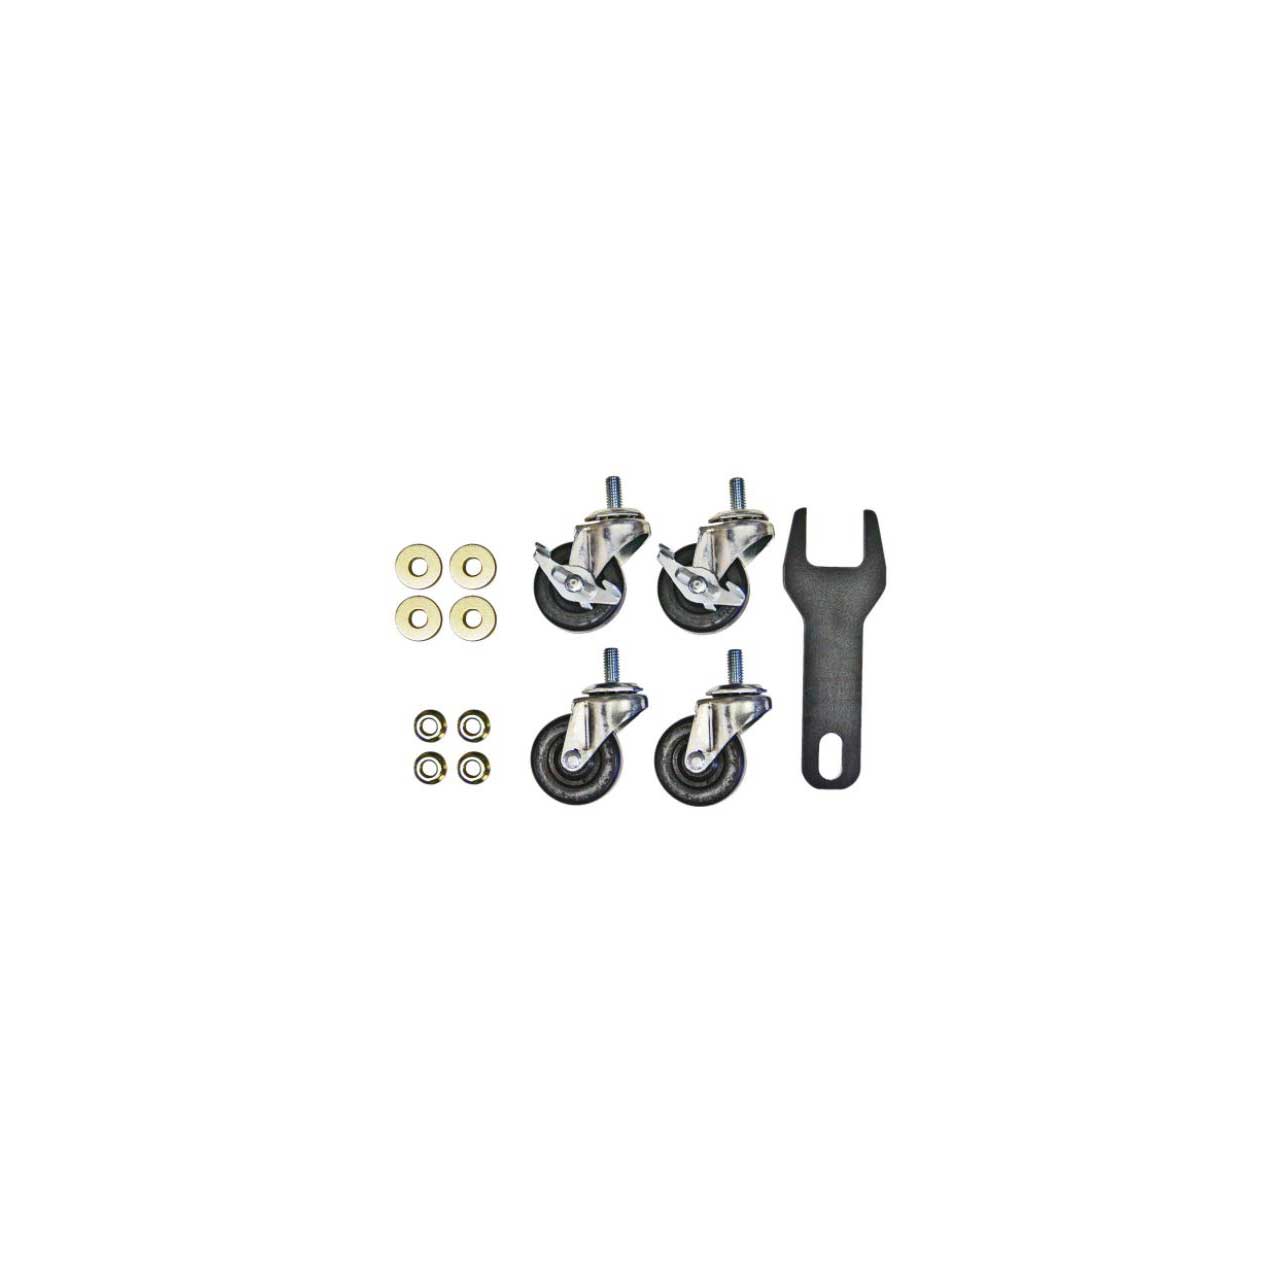 Hannay Reels 99 49-0073 Caster Kit for AV-1 and AVD-3 Cable Reels with Wrench and Hardware